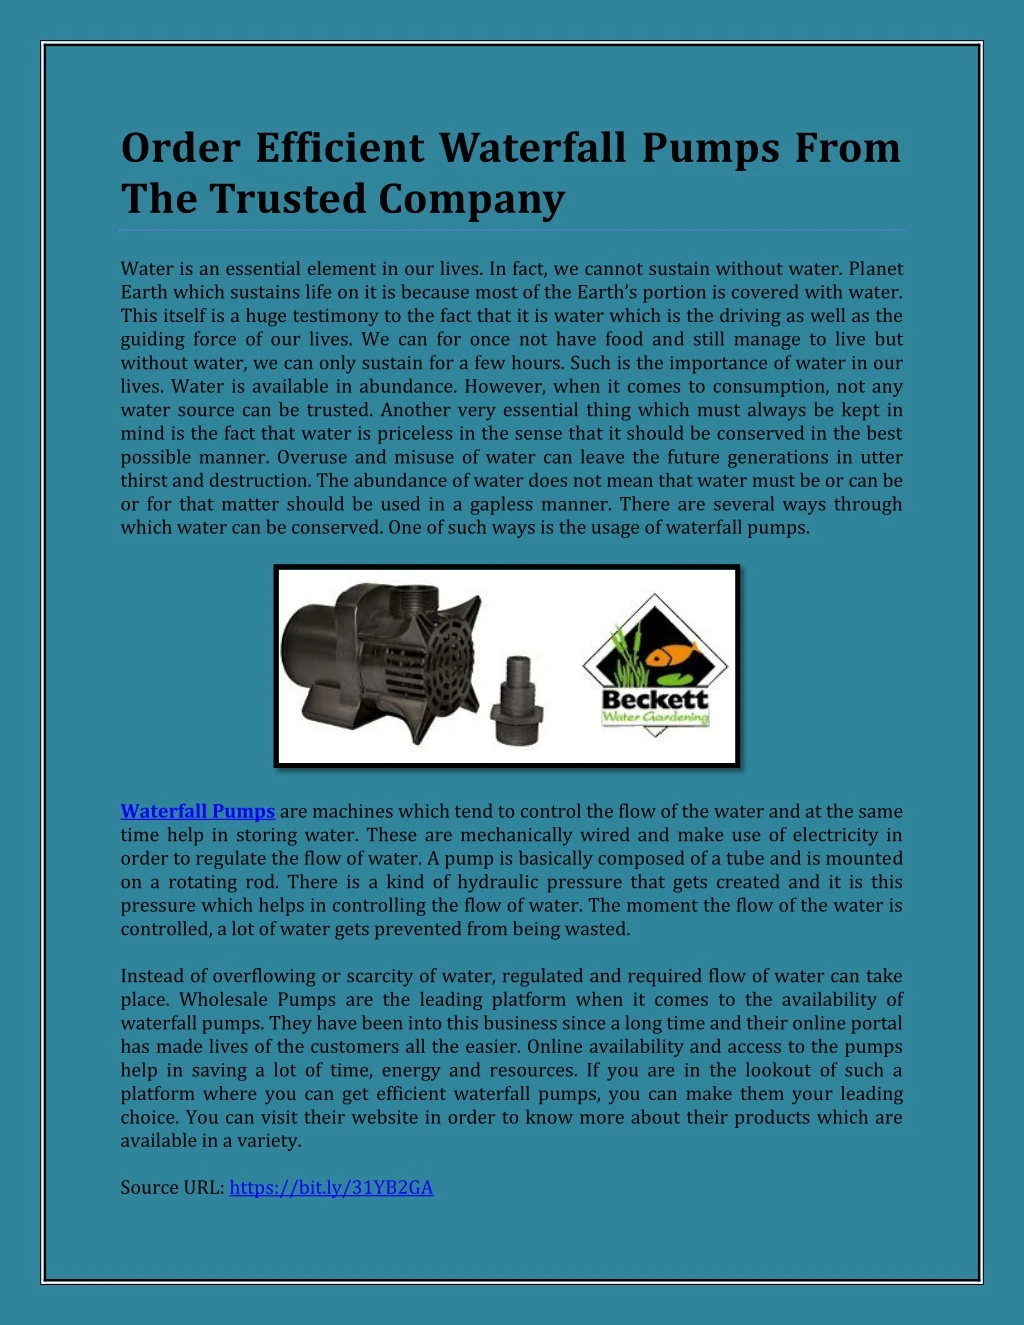 order efficient waterfall pumps from the trusted